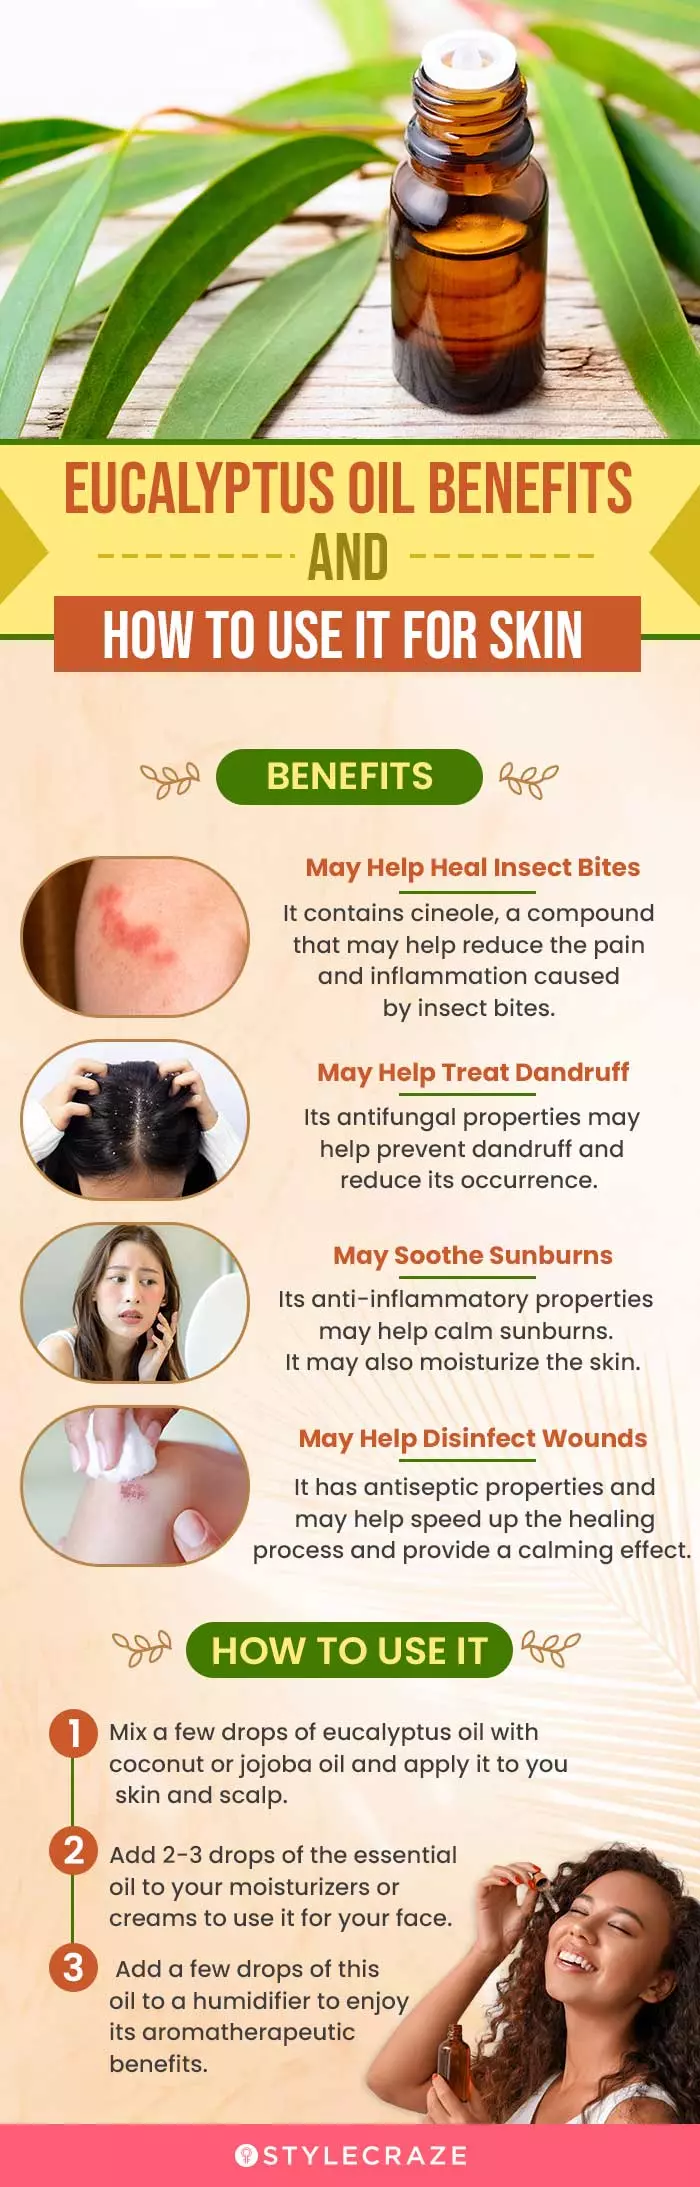 benefits and how to use eucalyptus oil for skin (infographic)